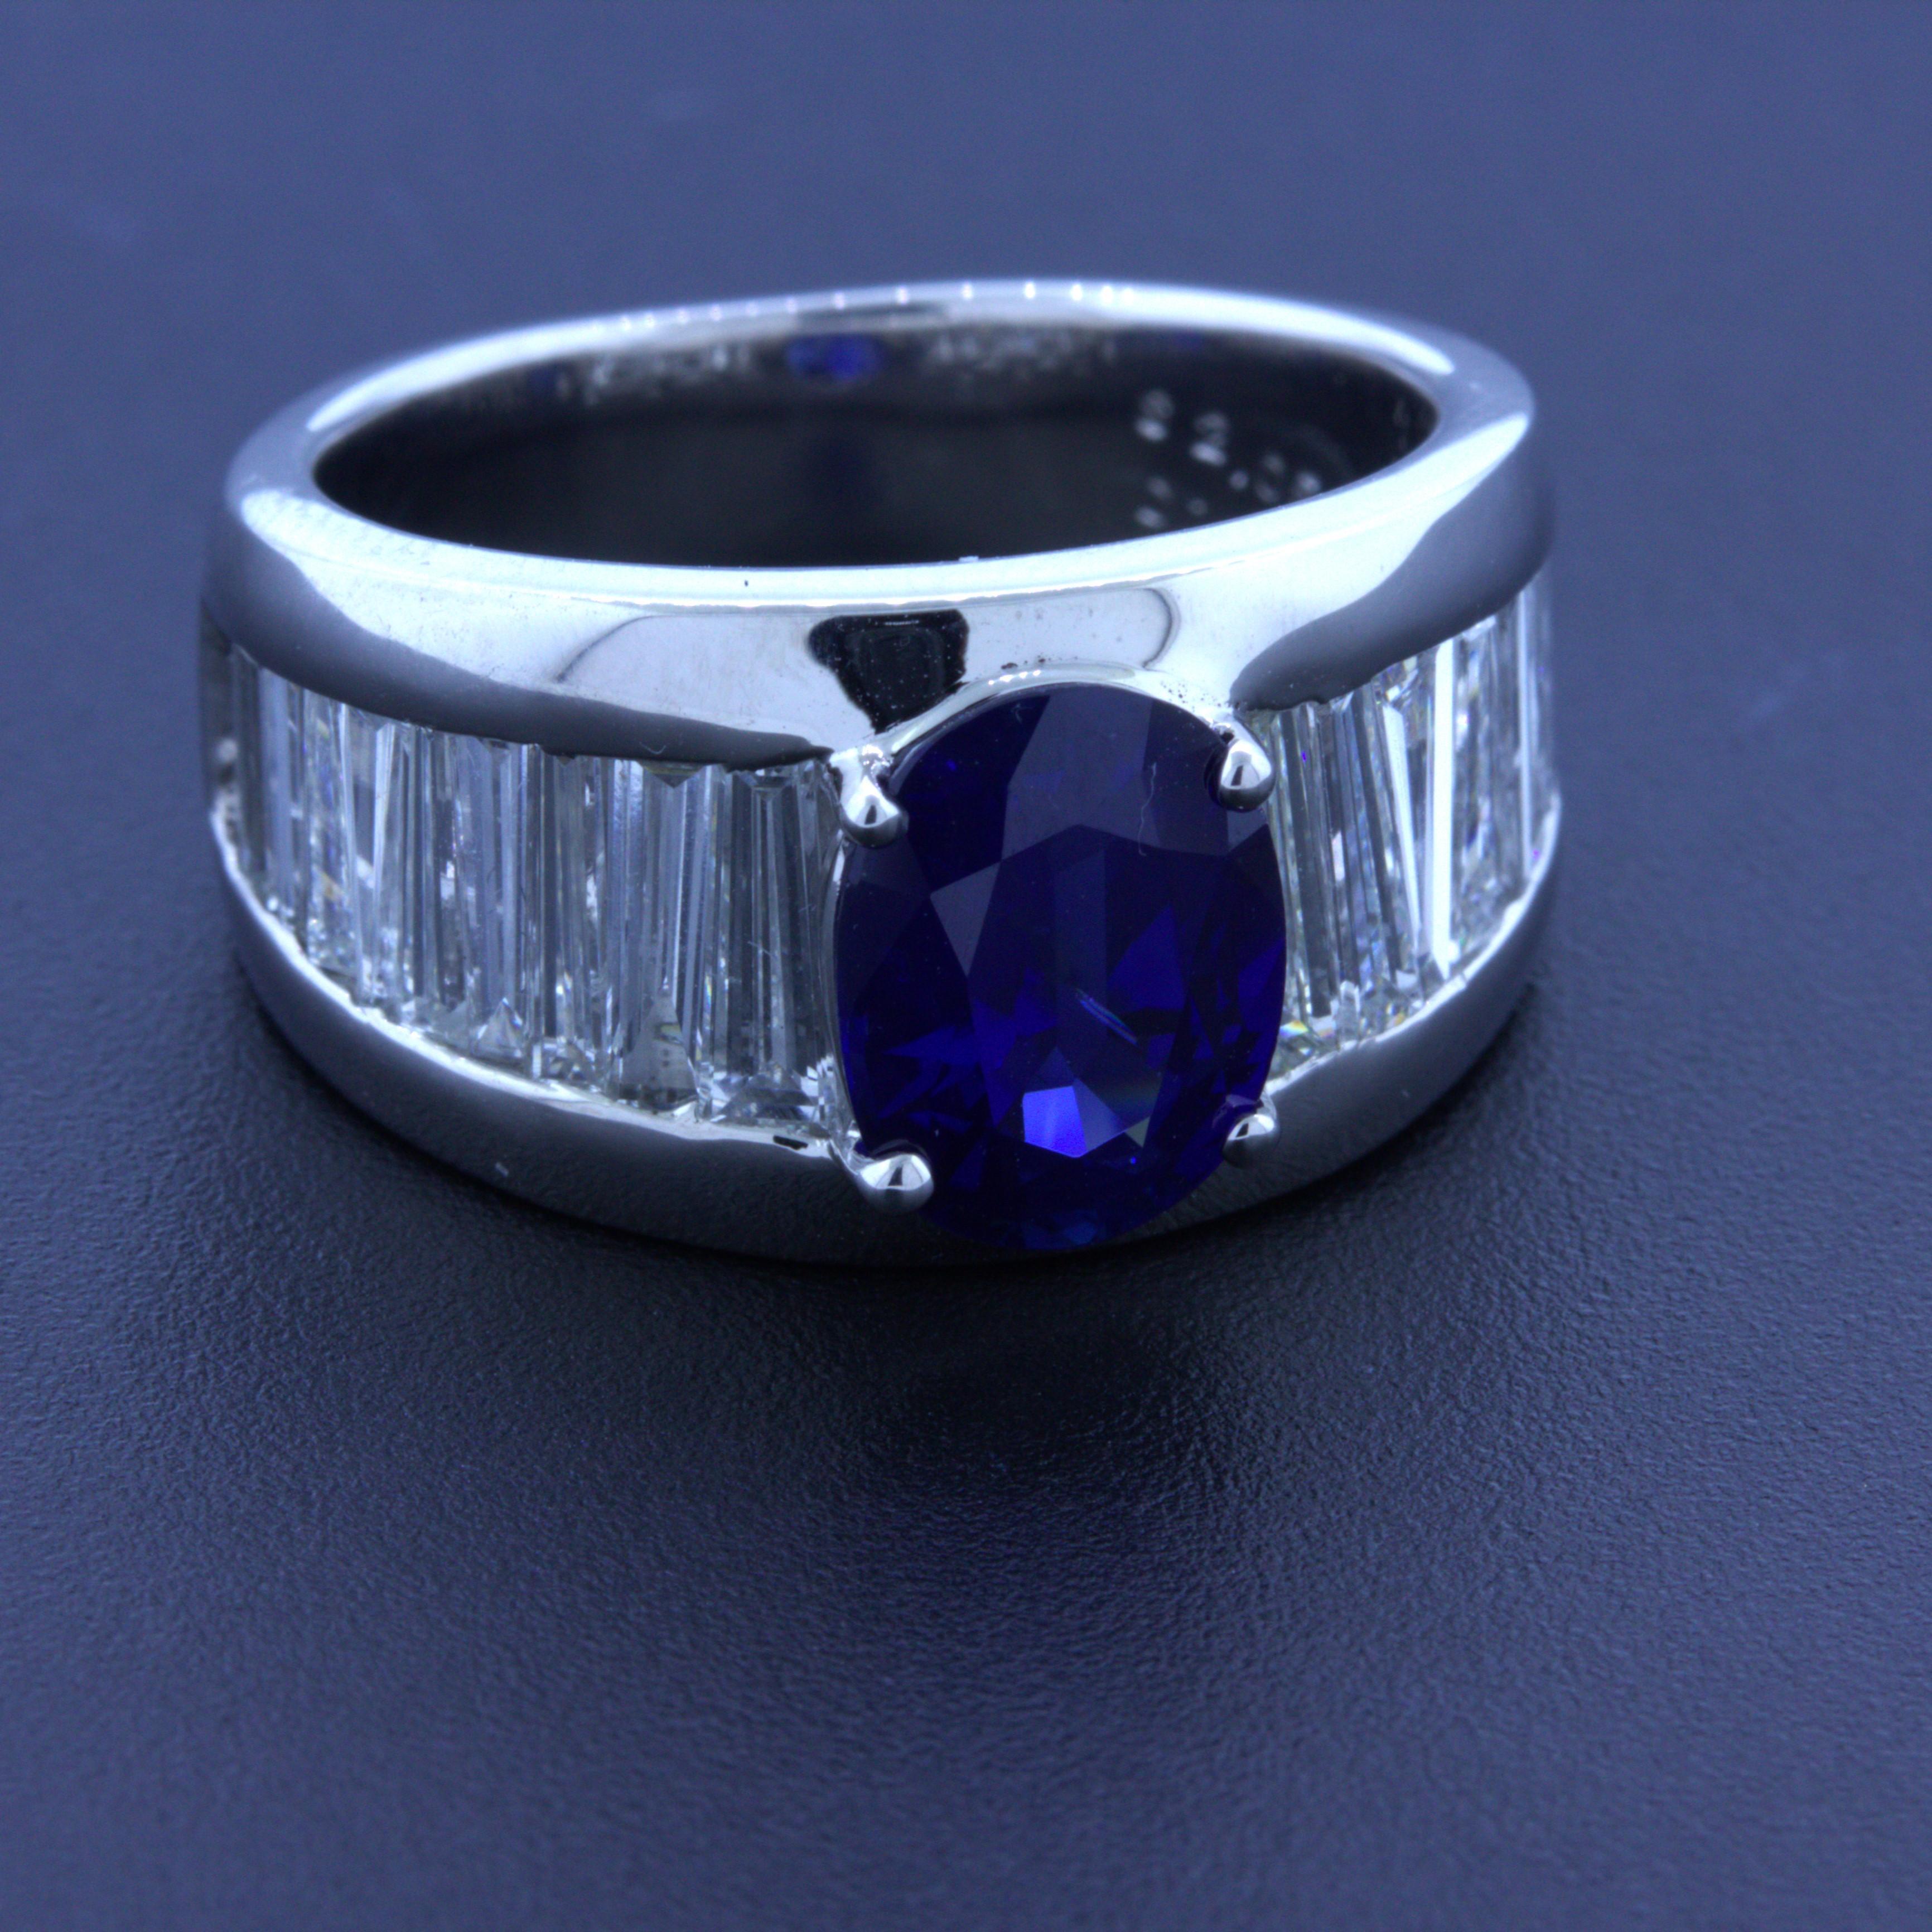 A lovely platinum ring featuring a 2.05 carat unheated sapphire certified by the GIA. The sapphire has a rich vivid blue color that is so pleasing to look at. It is also free of any eye-visible inclusions letting the stone shine brightly. It is